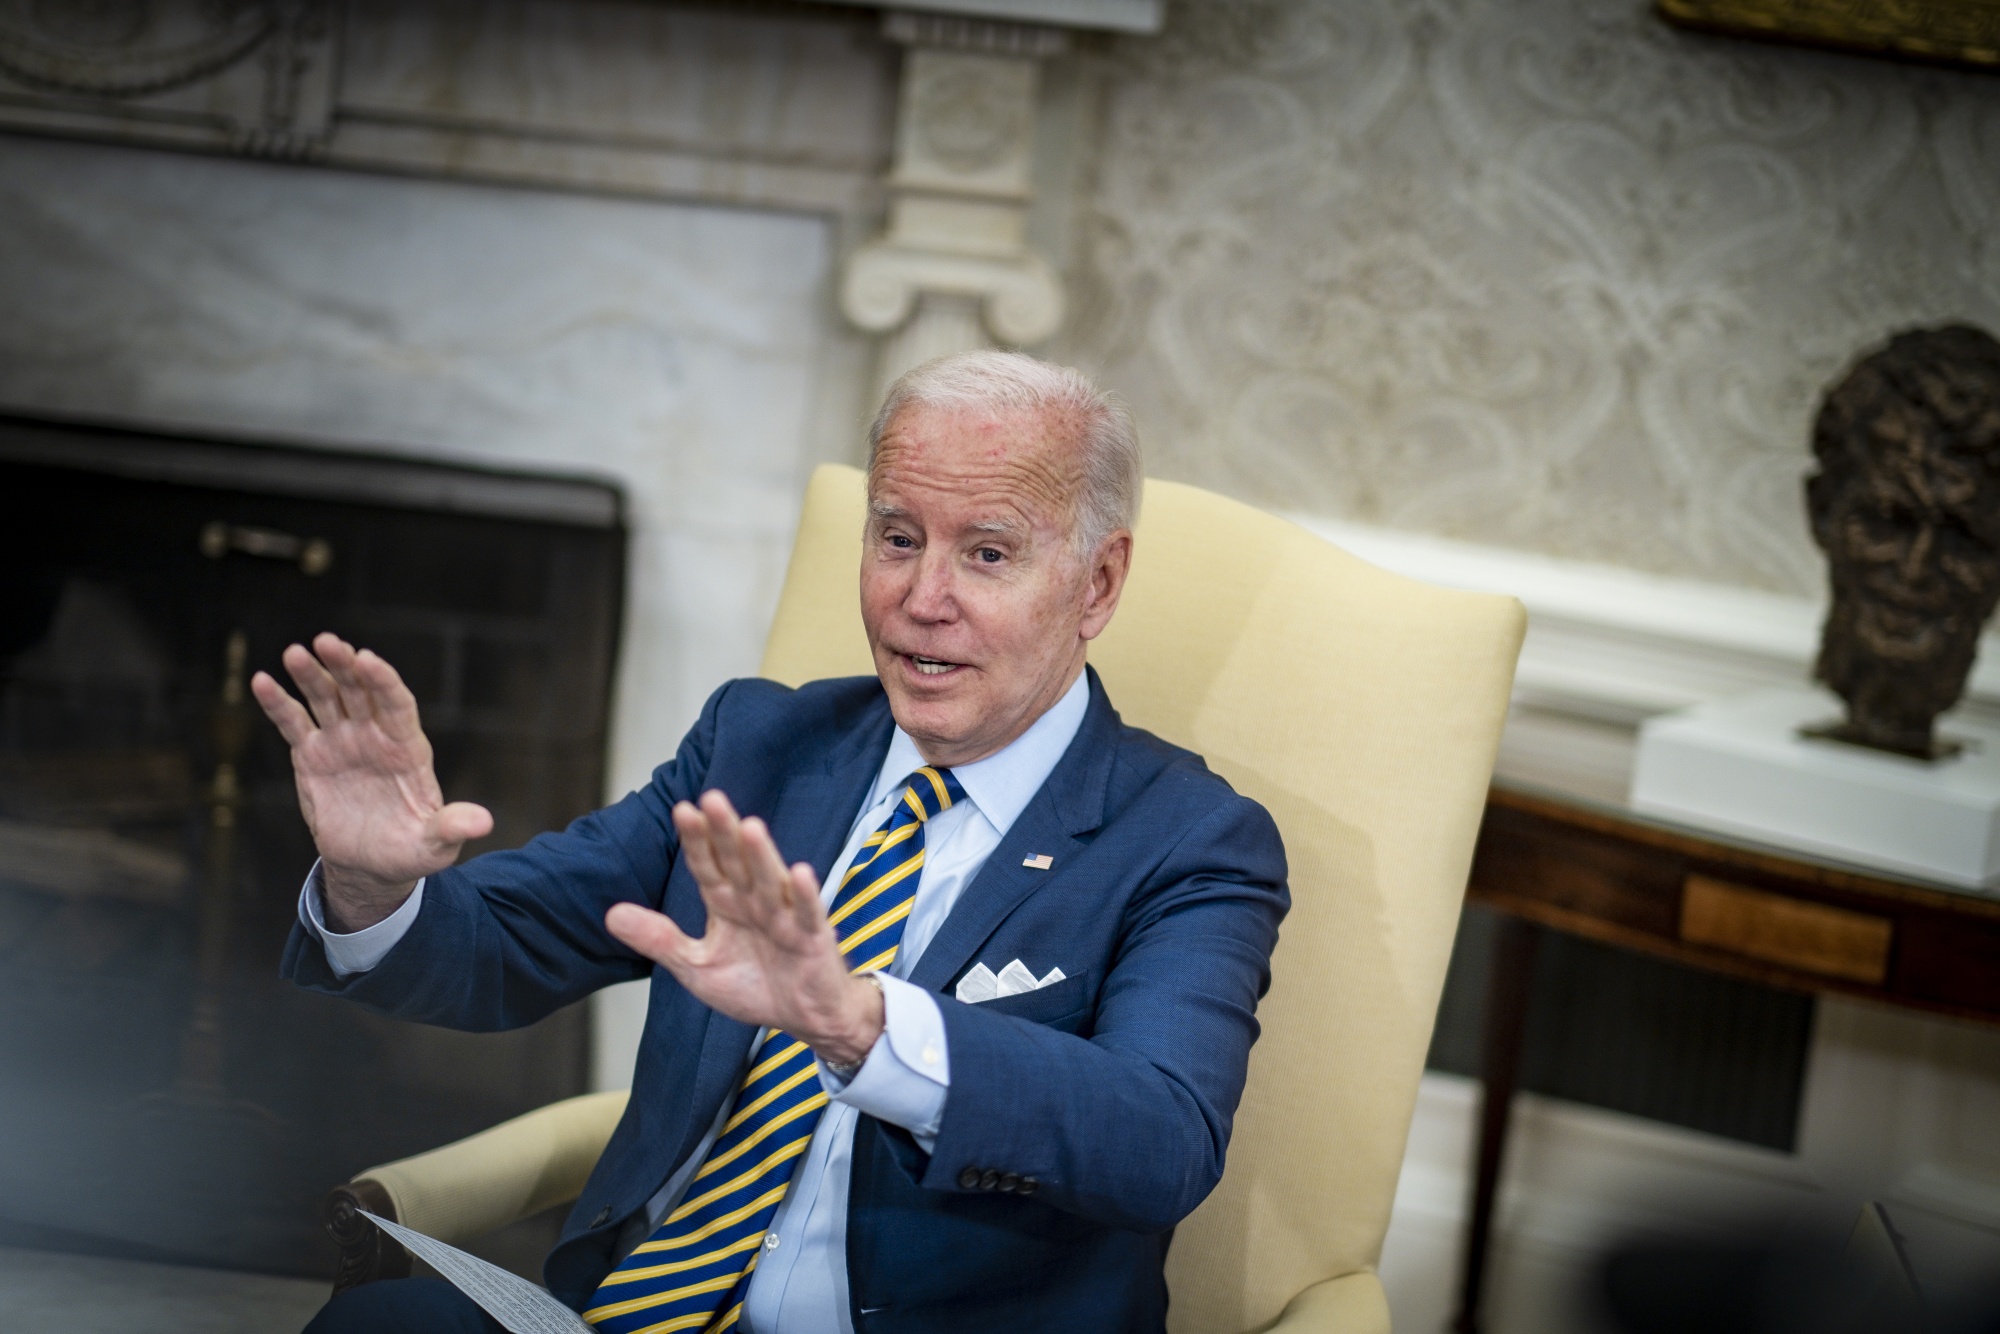 Biden Says He’ll Wait Until After Midterms to Decide 2024 Run on 60